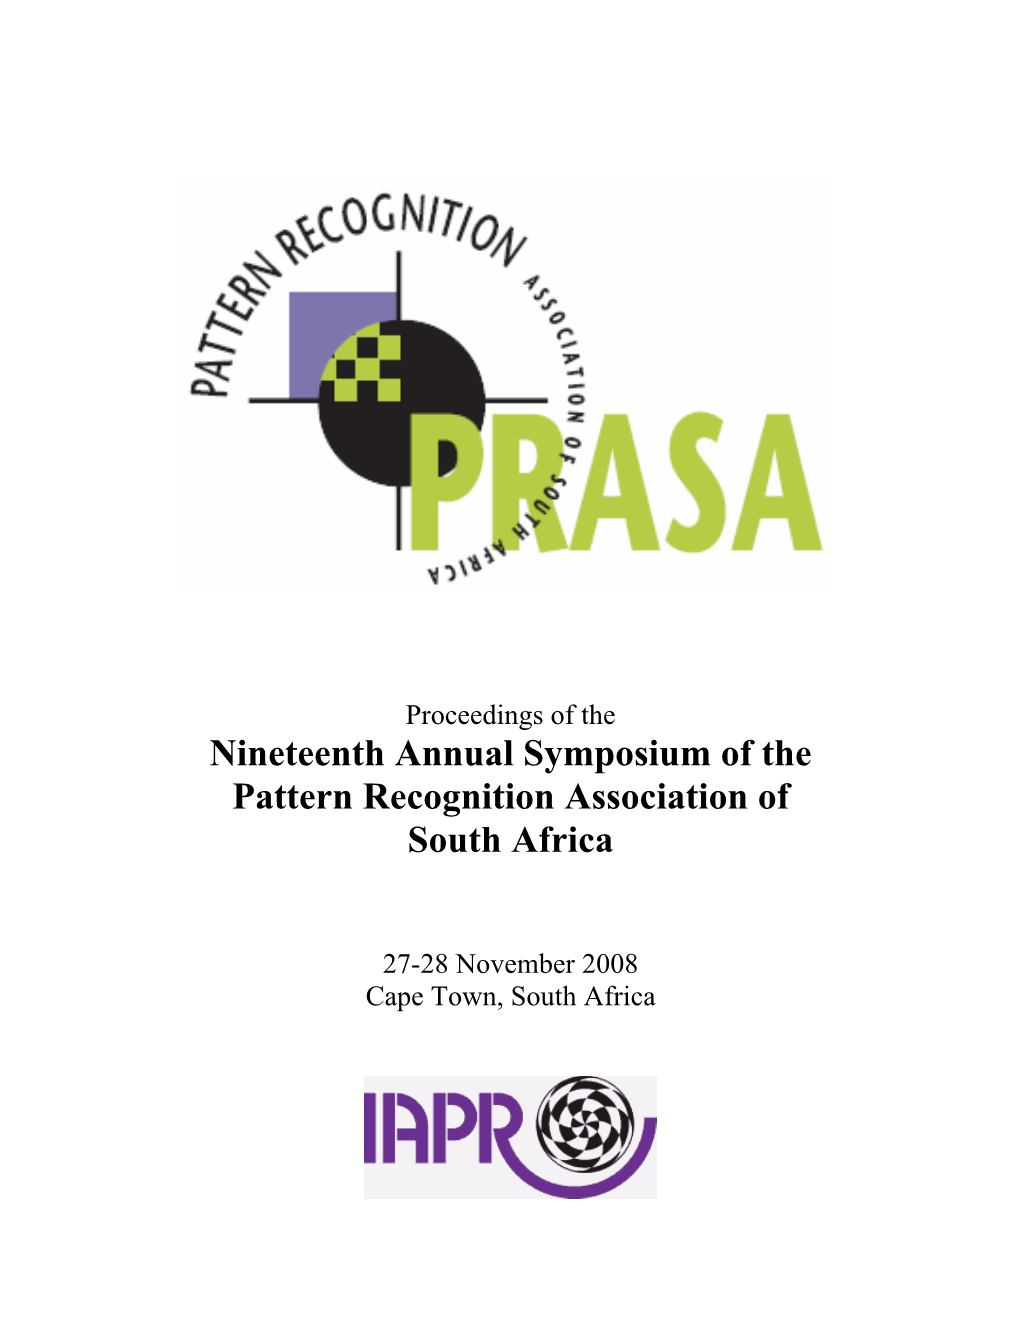 Nineteenth Annual Symposium of the Pattern Recognition Association of South Africa